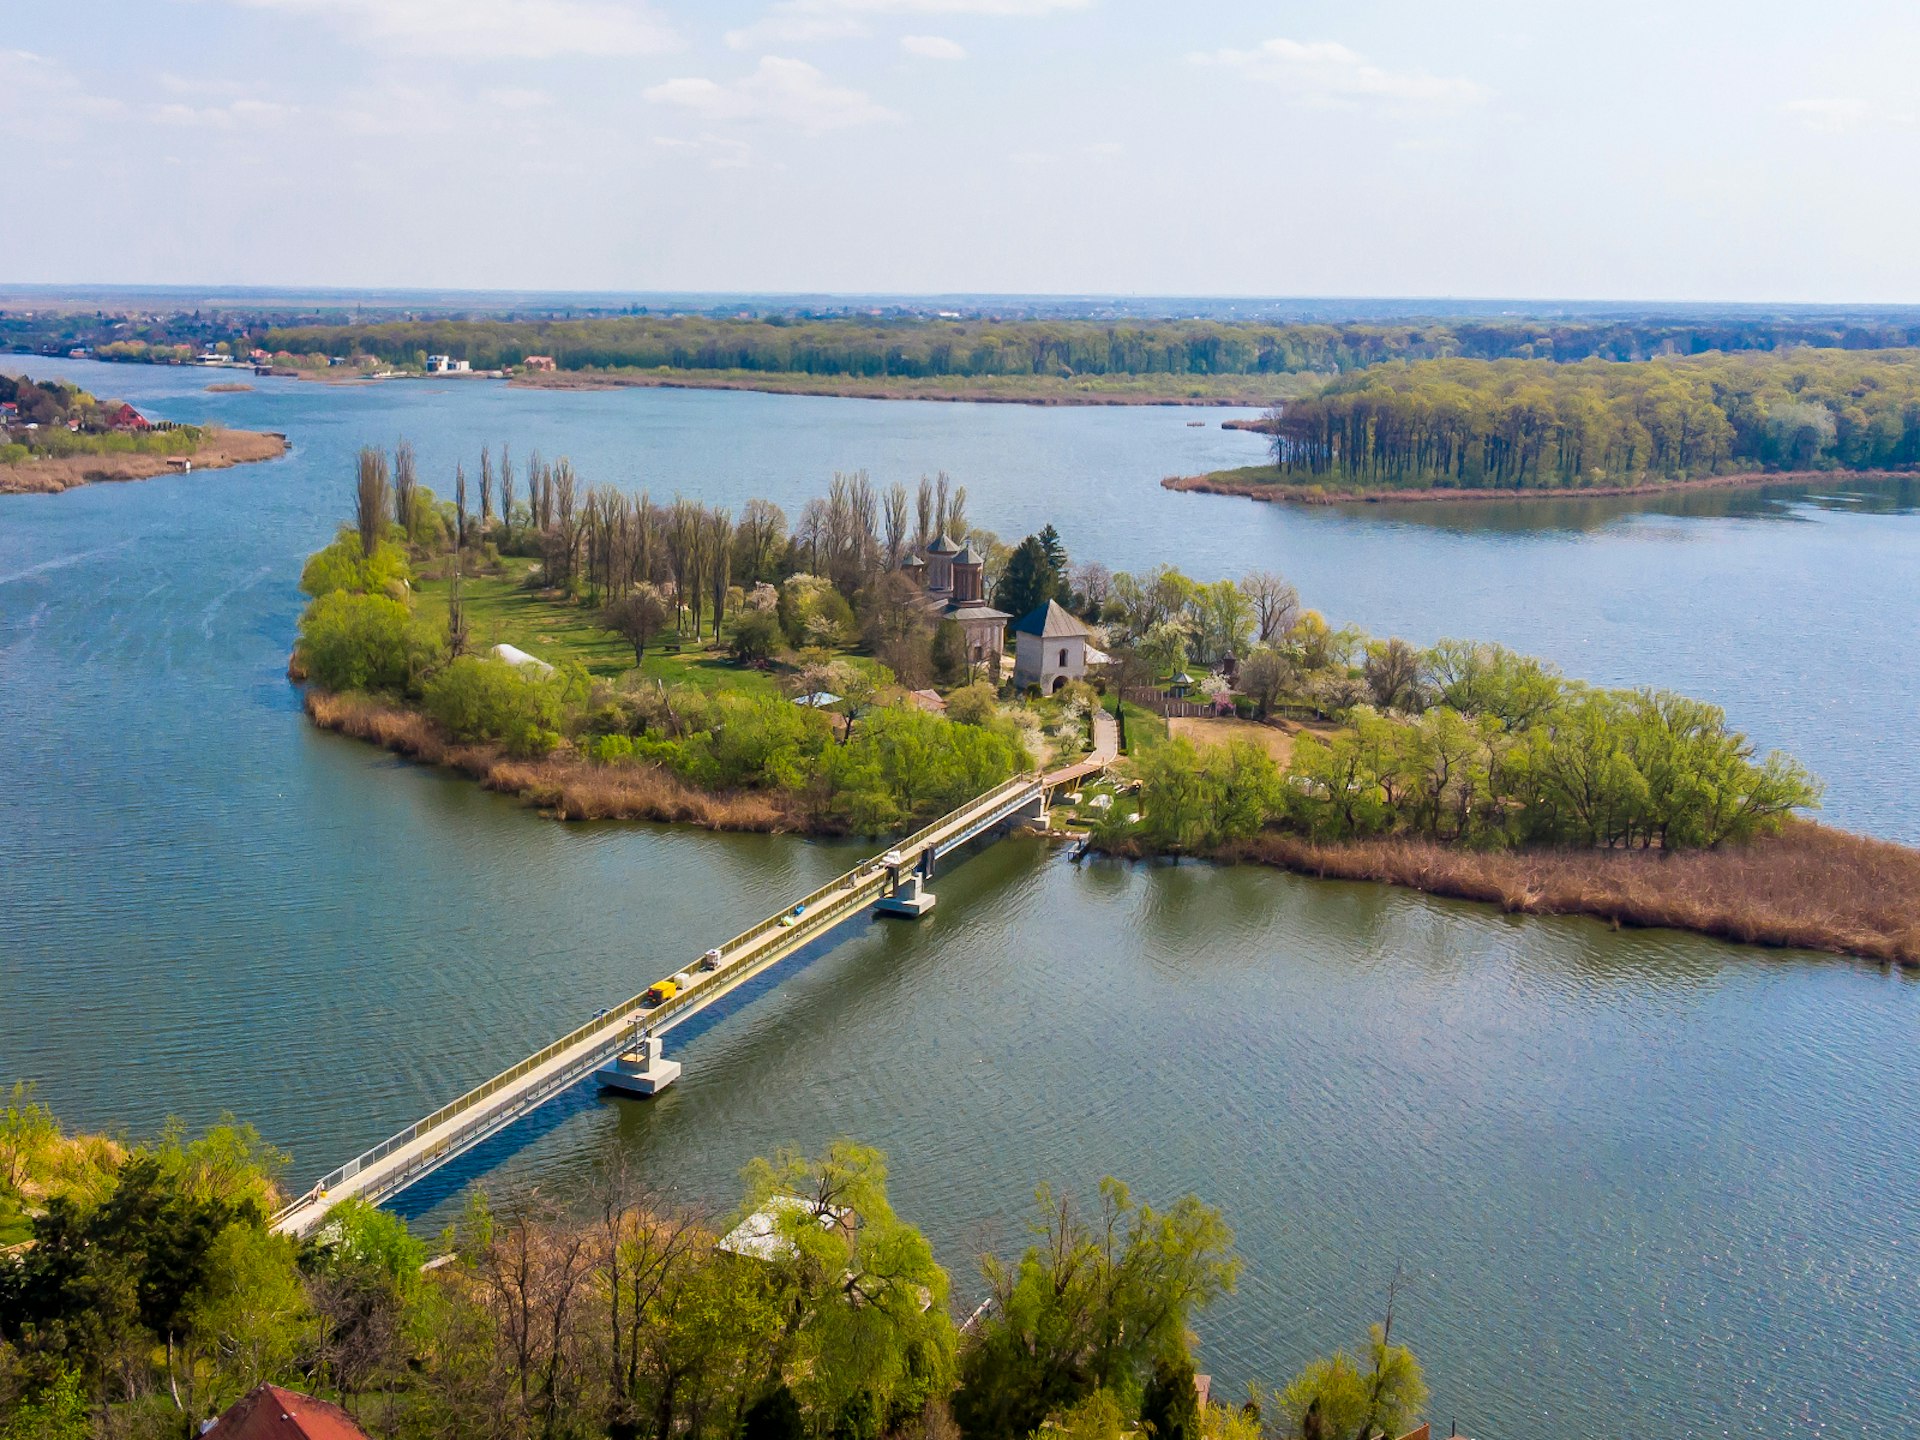 Drone view of Snagov Monastery on Snagov Lake near Bucharest